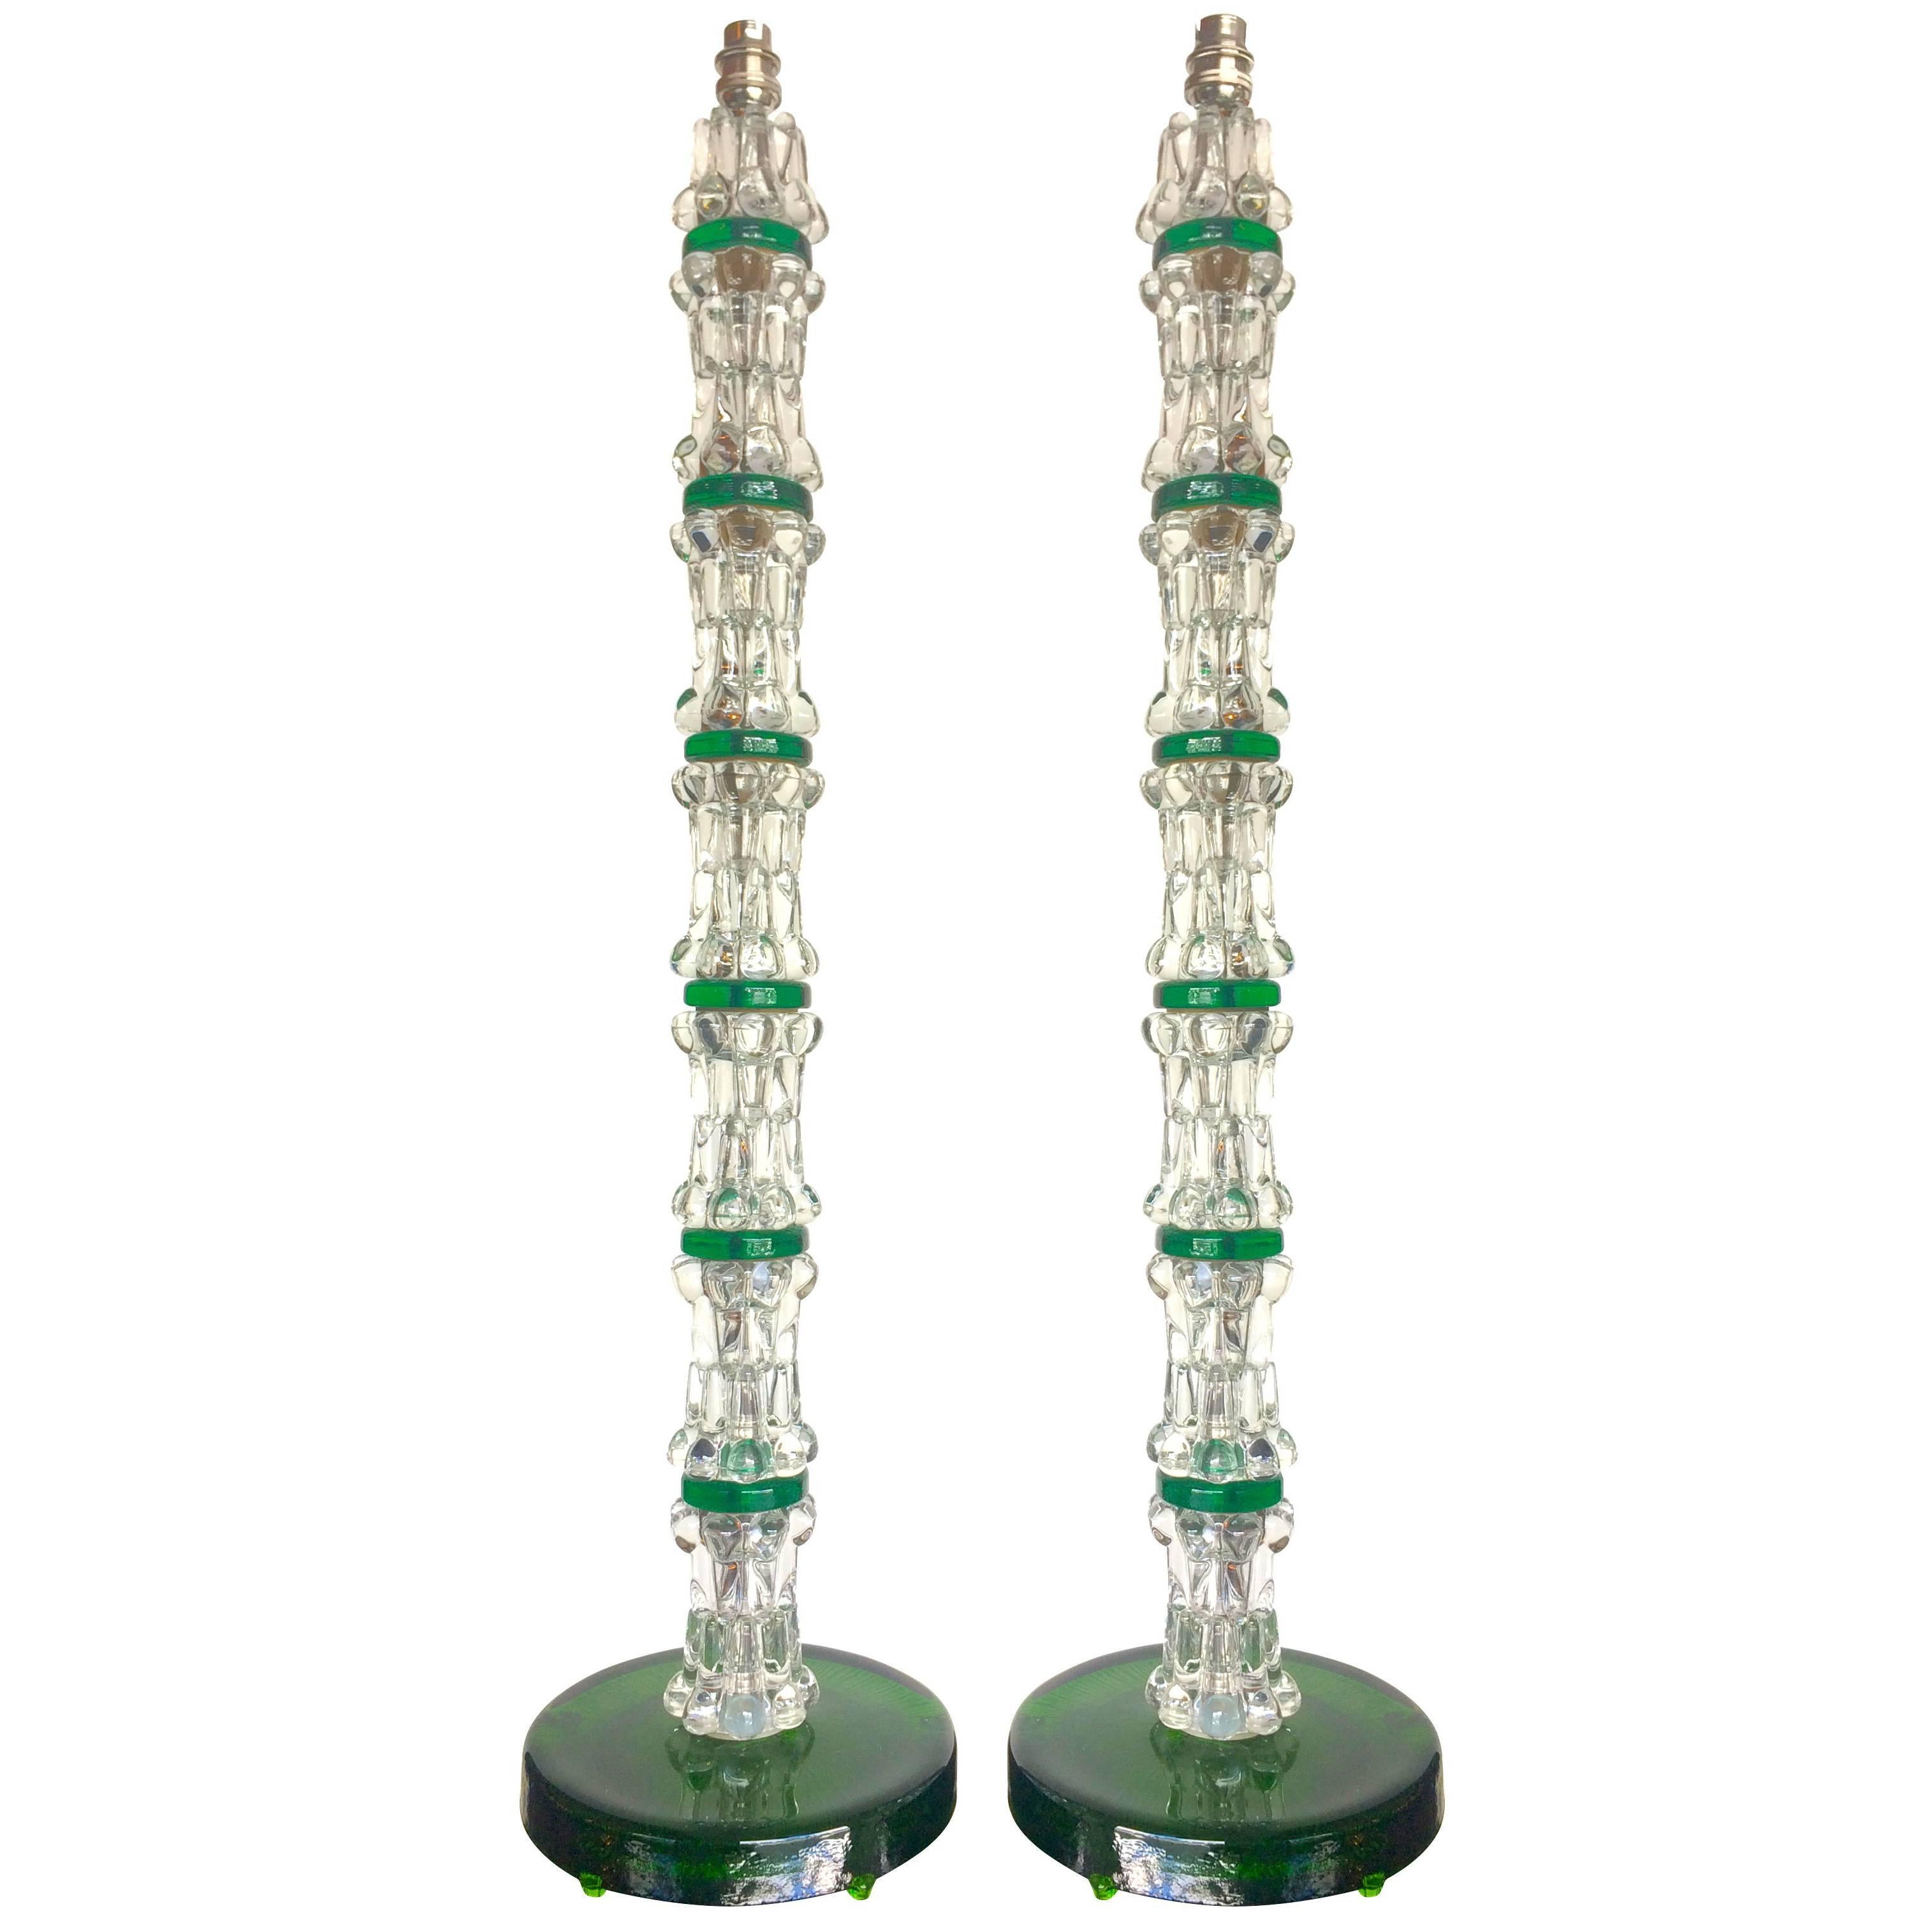 Large Pair of Green Orrefors Glass Lamps